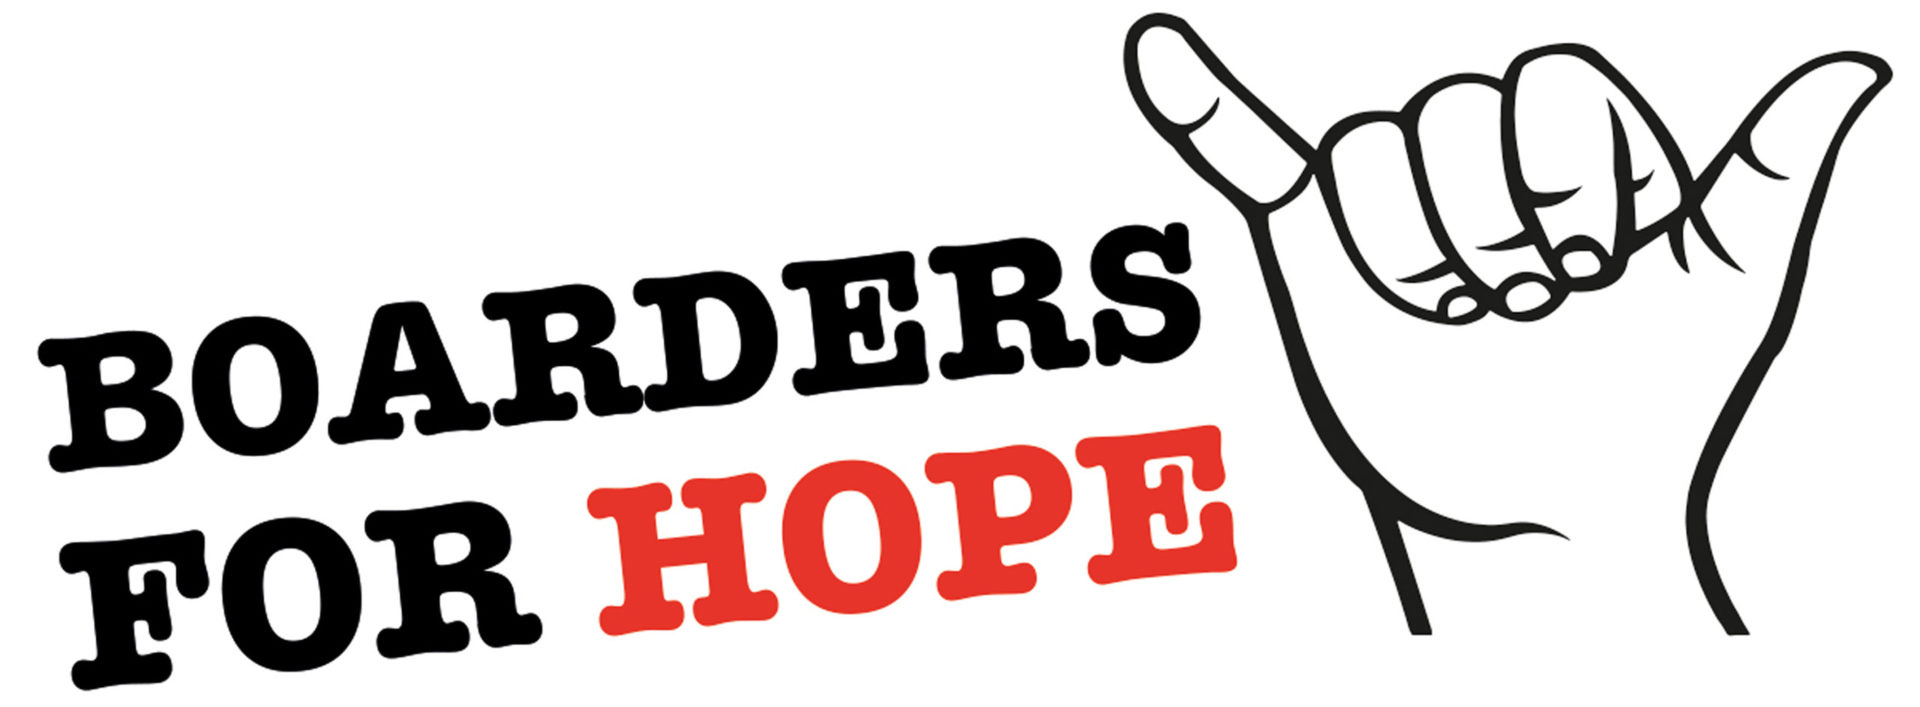 Boarders For Hope!